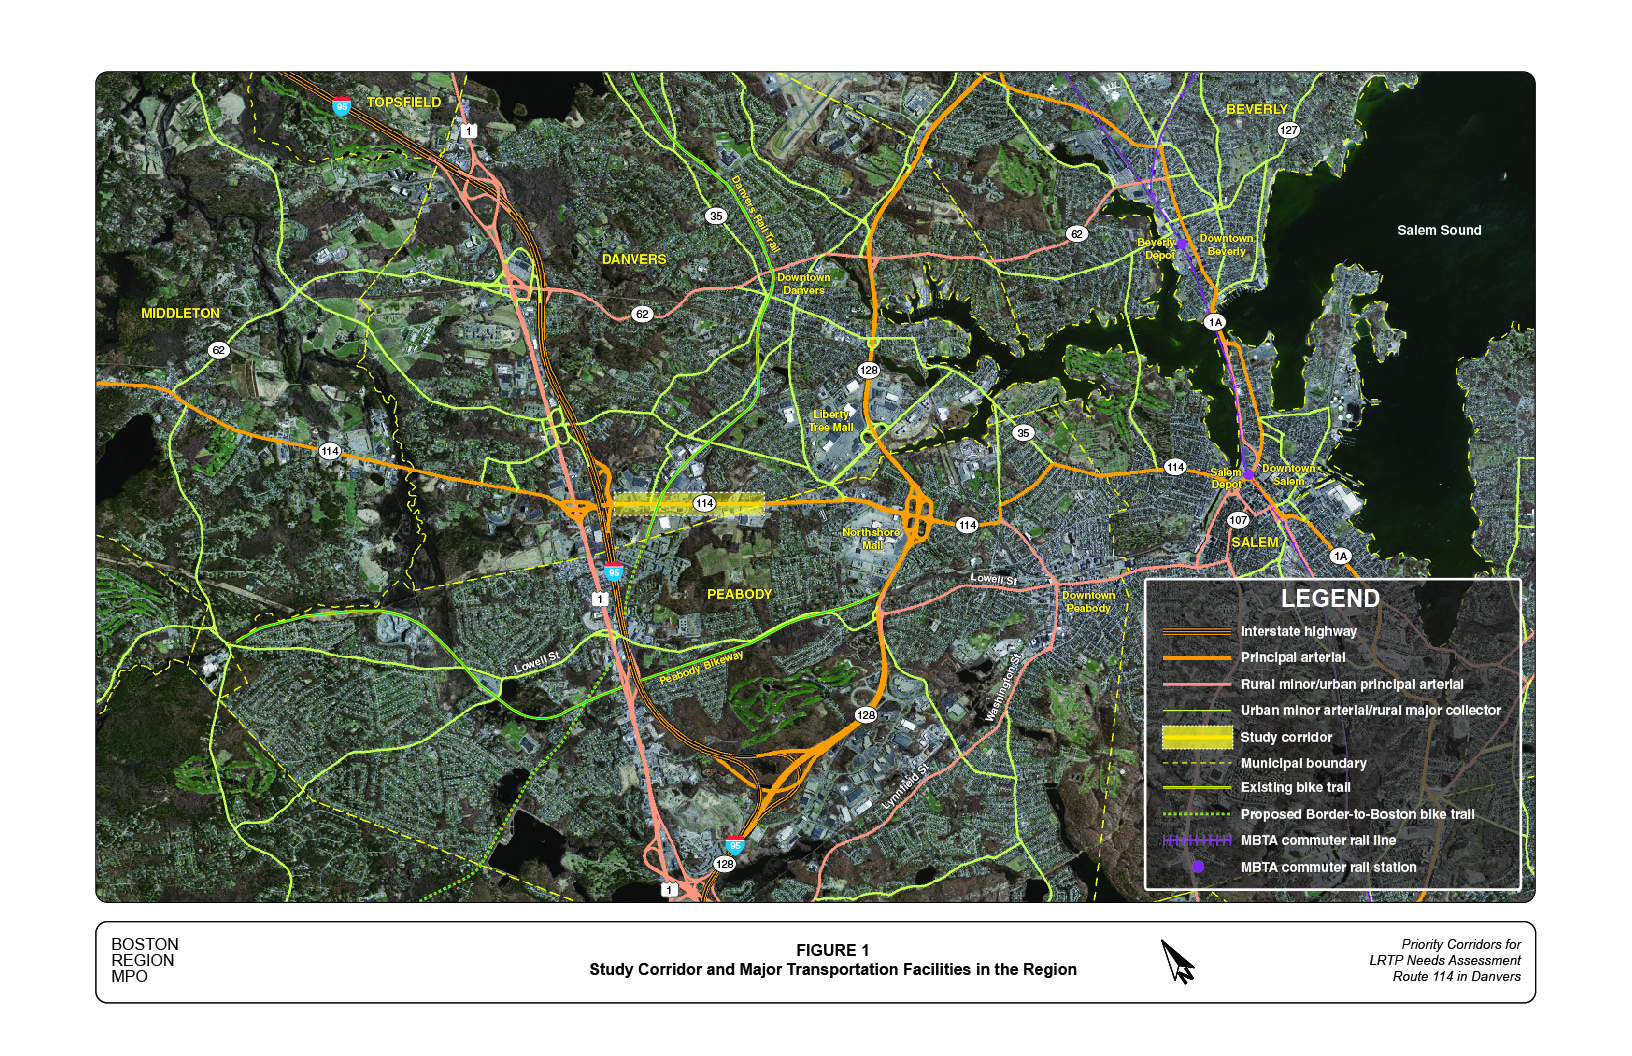 Figure 1 shows the location of the study corridor and the major transportation facilities in the region.